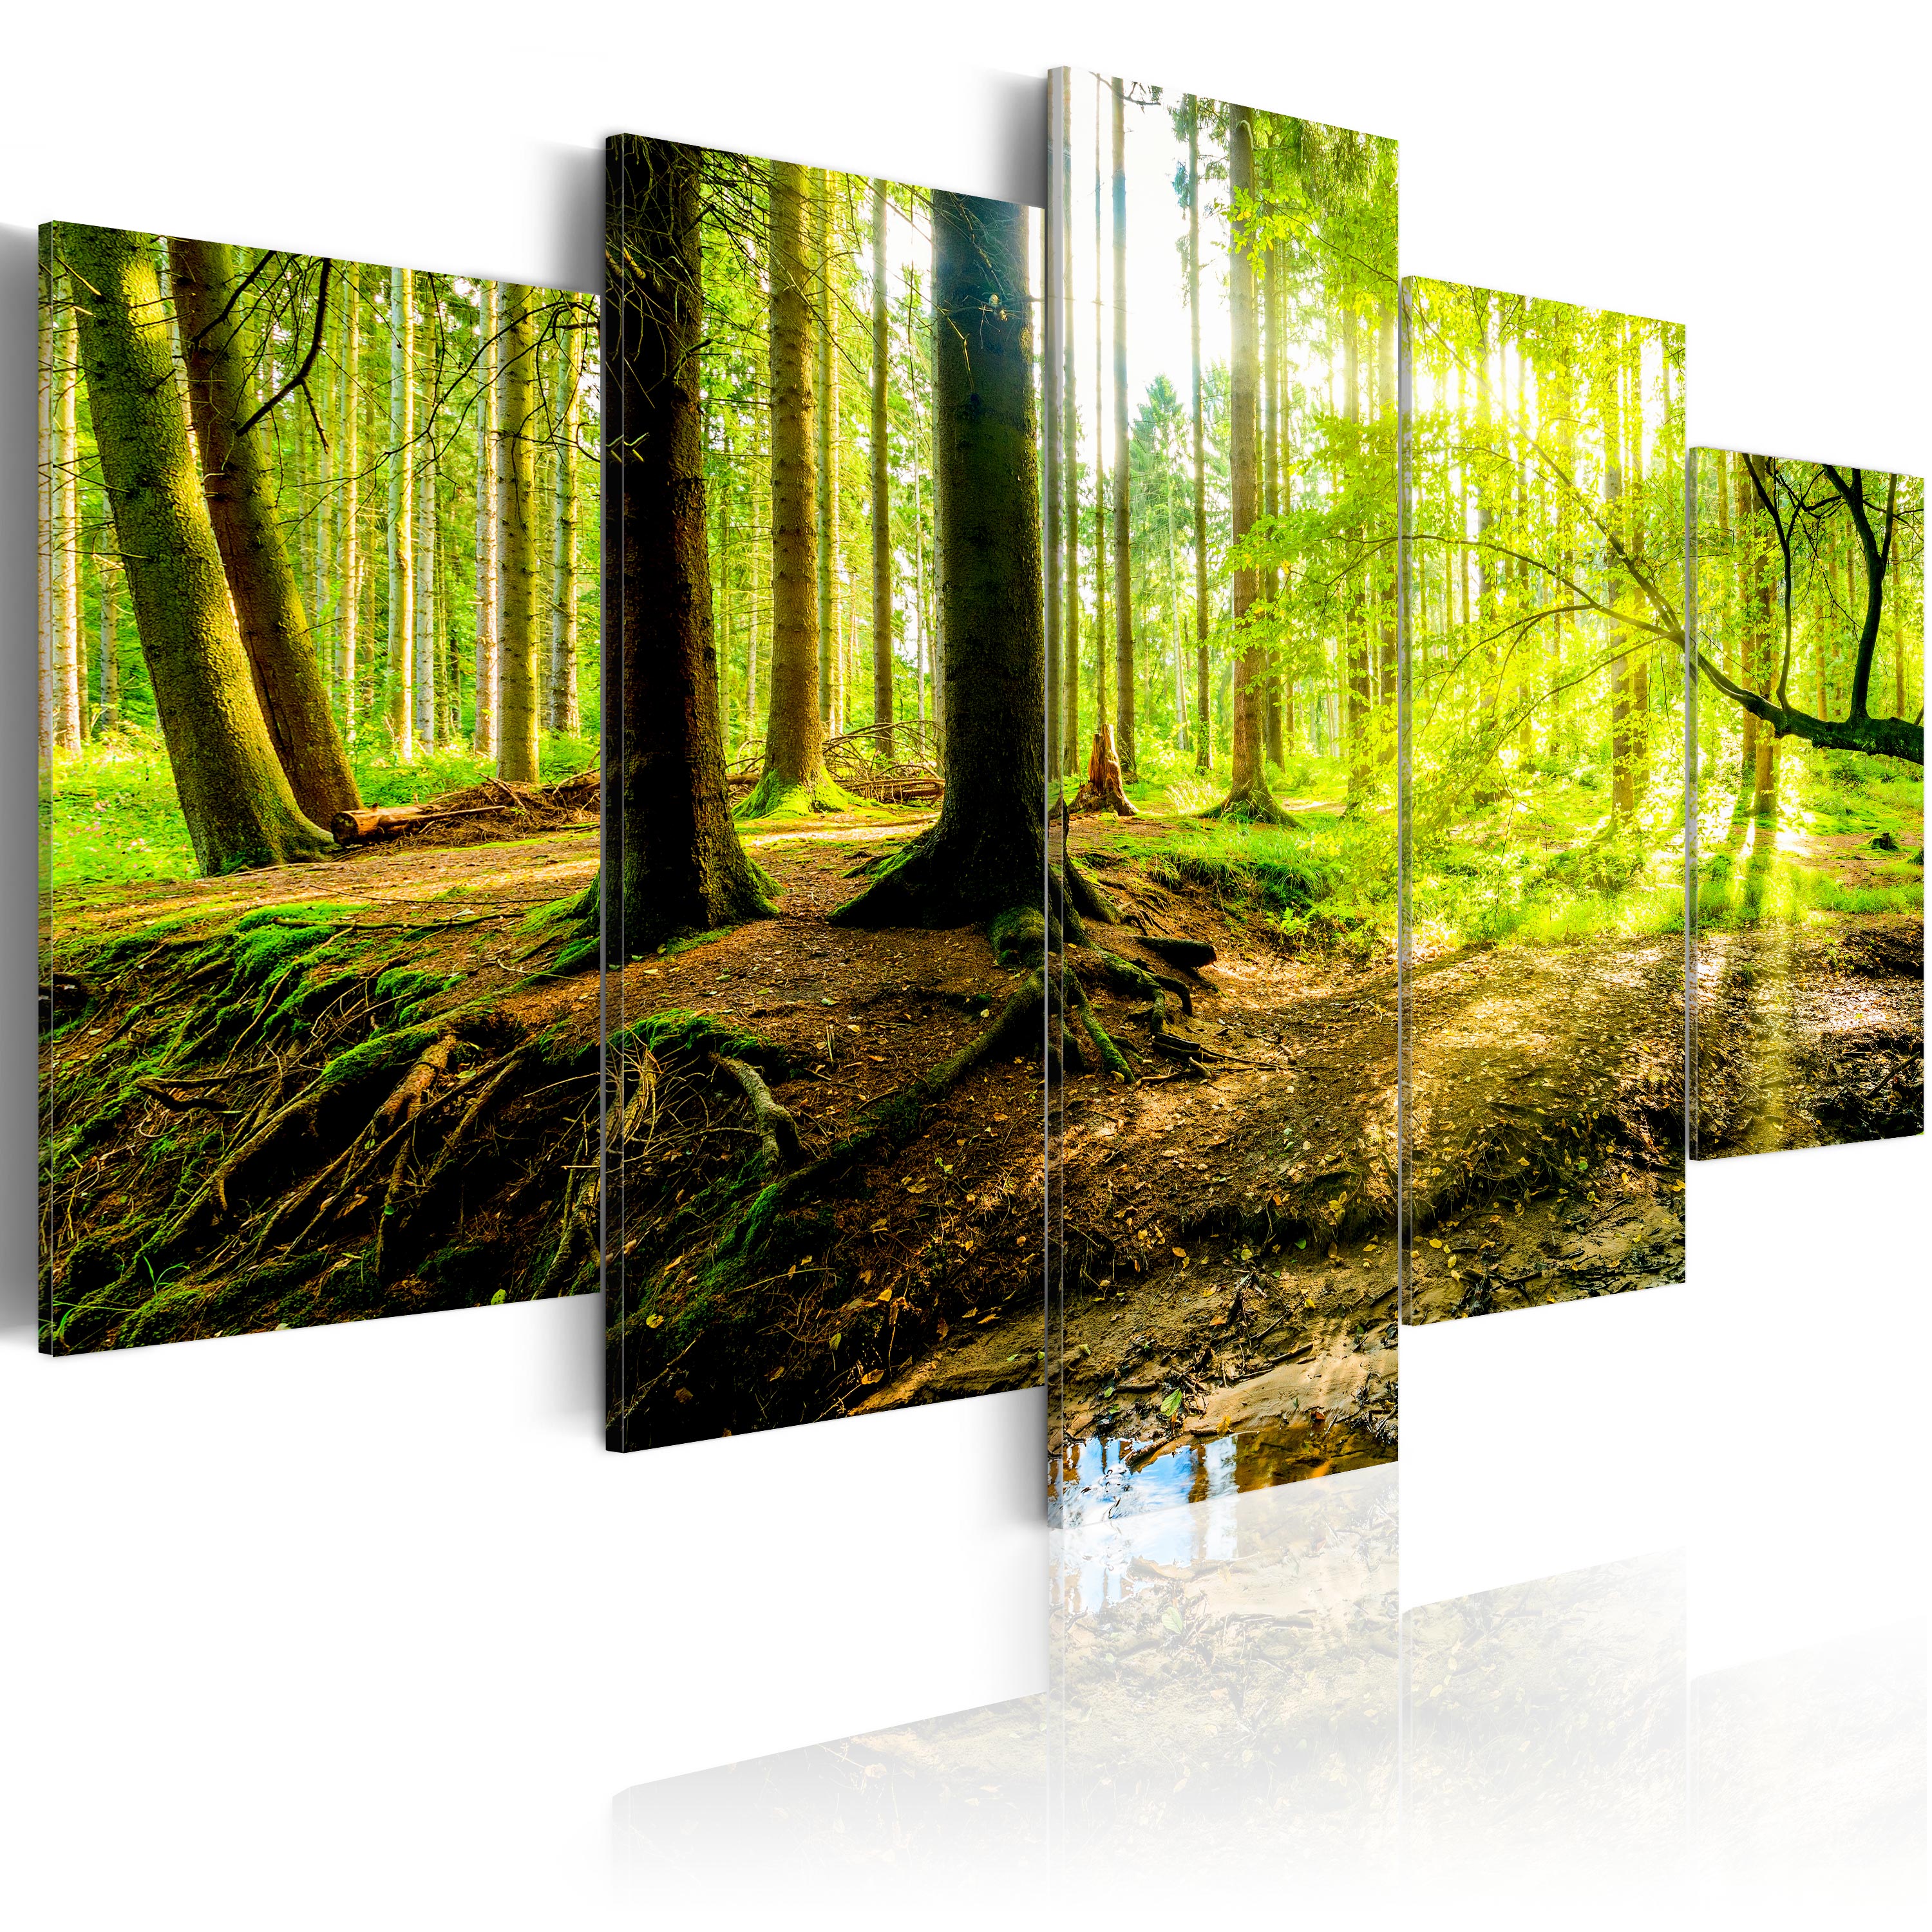 Canvas Print - Poetry of a Forest - 100x50